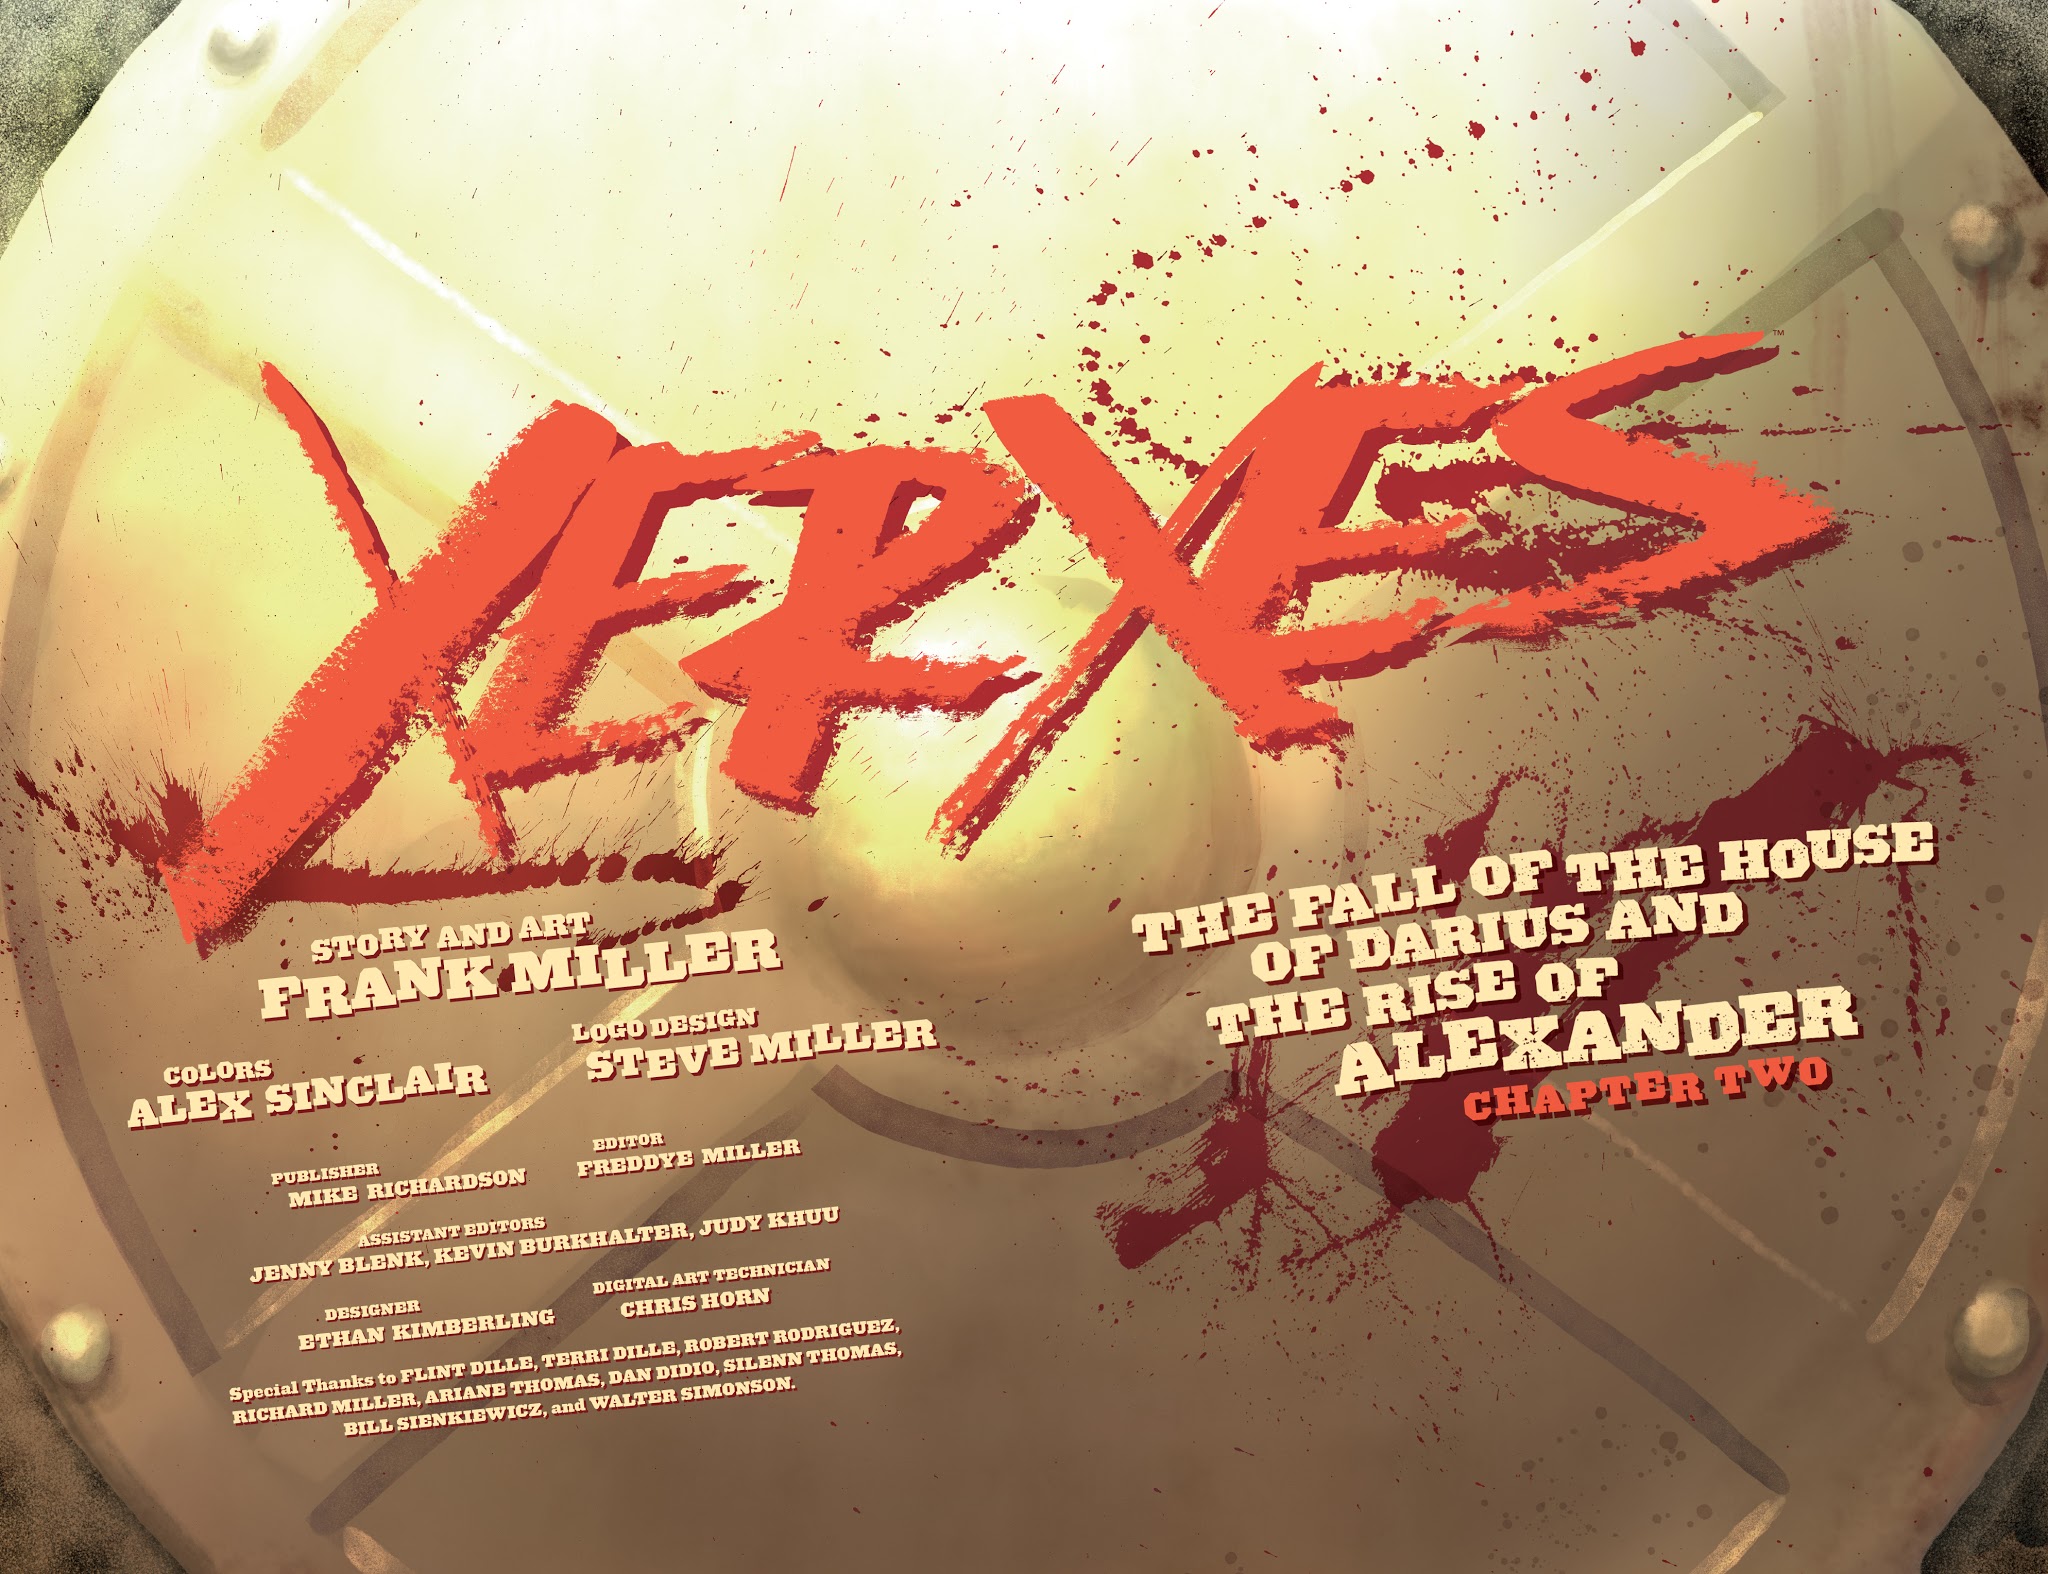 Read online Xerxes: The Fall of the House of Darius and the Rise of Alexander comic -  Issue #2 - 2